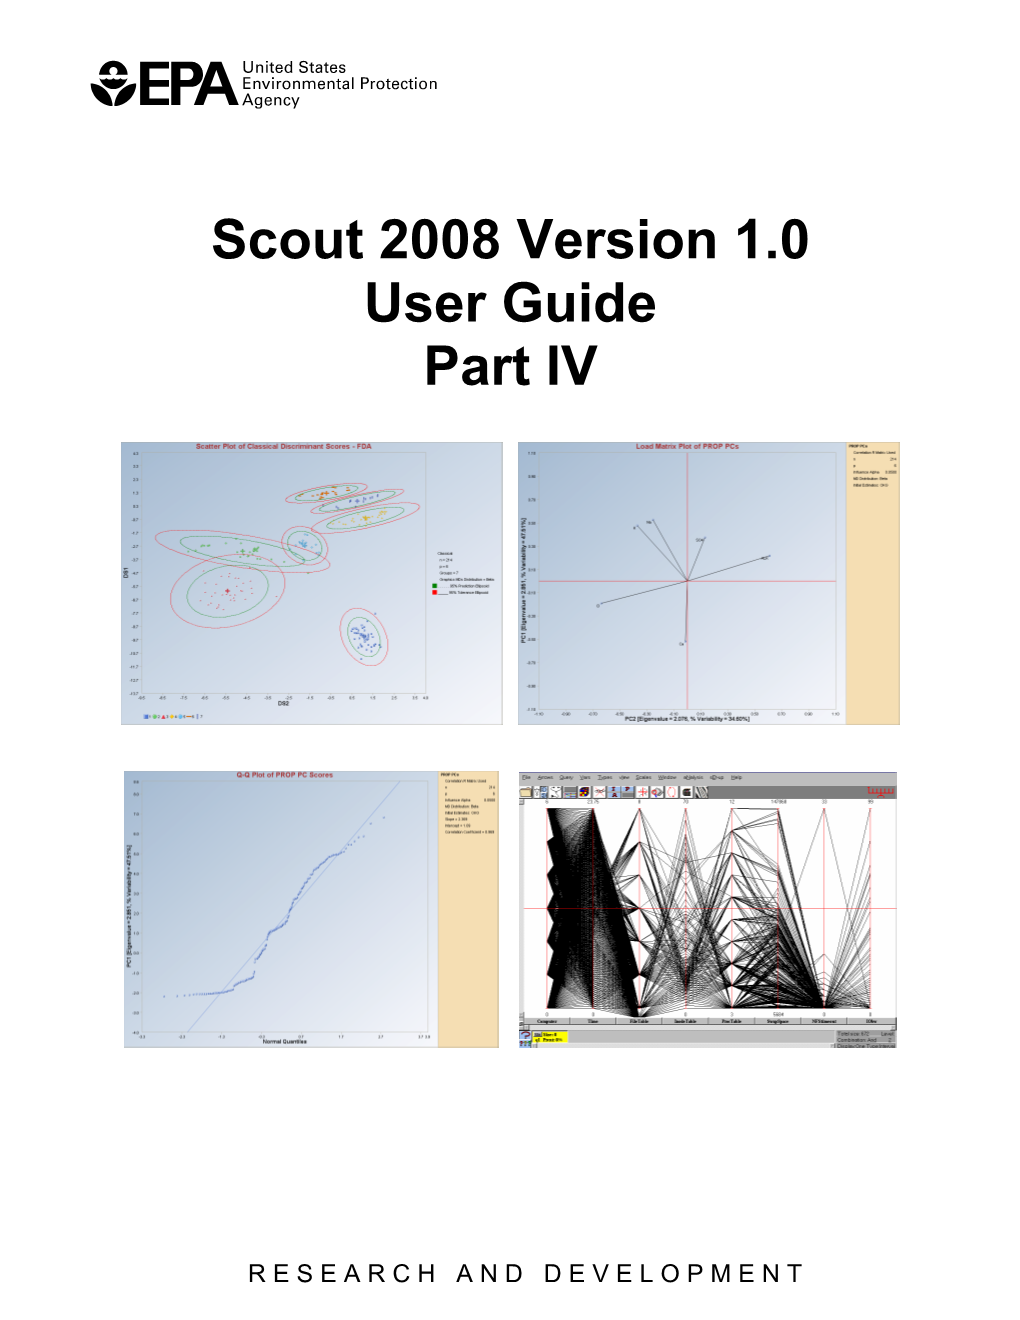 Scout 2008 Version 1.0 User Guide Part IV